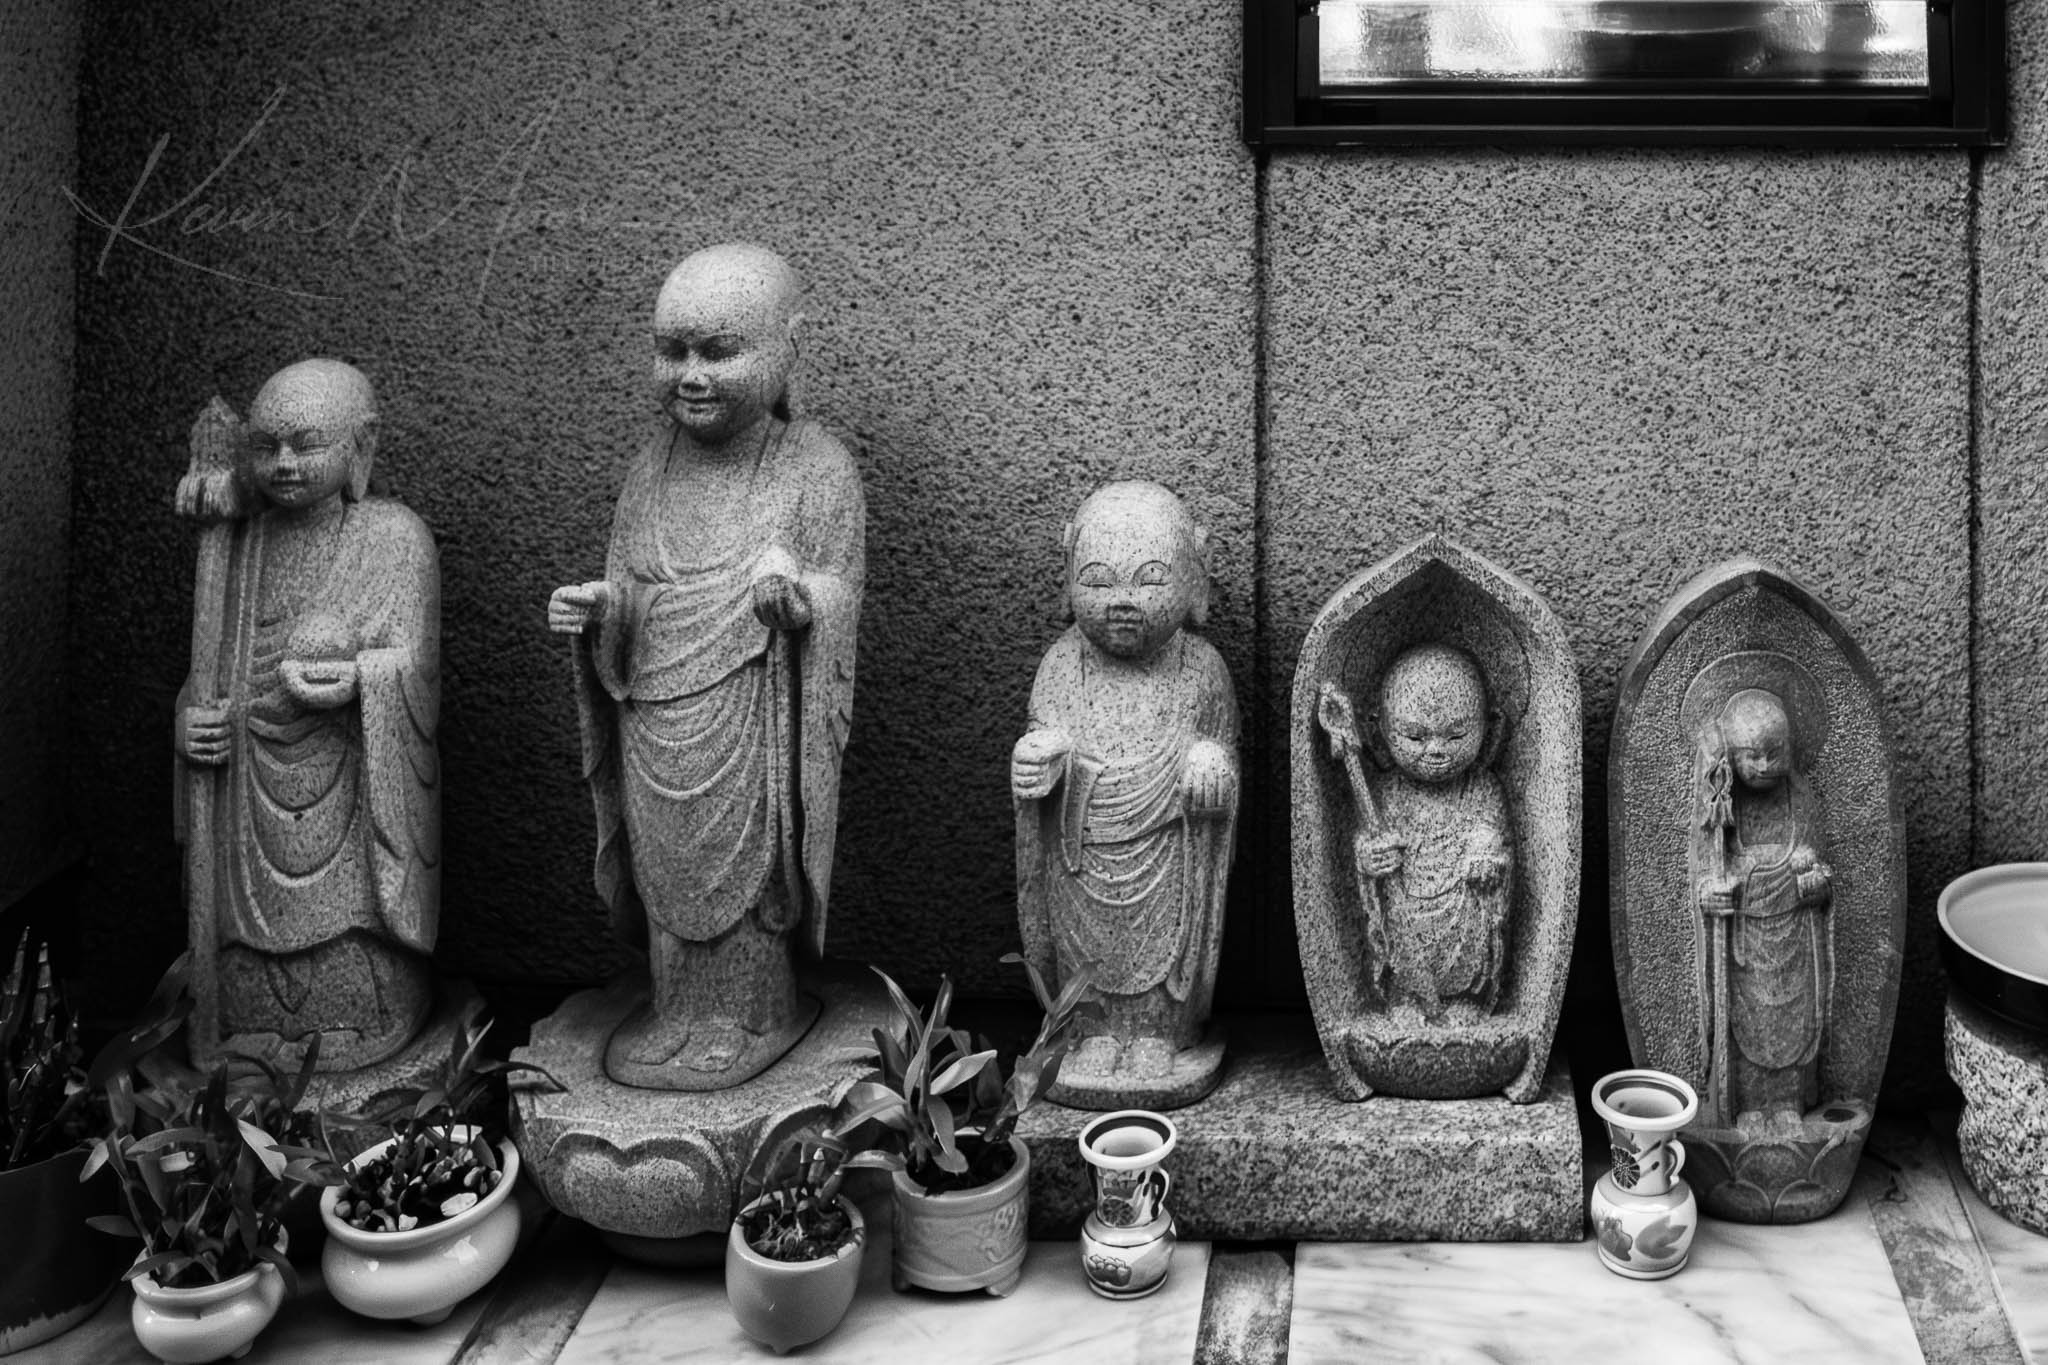 Monochrome image of five distinct Buddhist statues on a shelf with offerings.